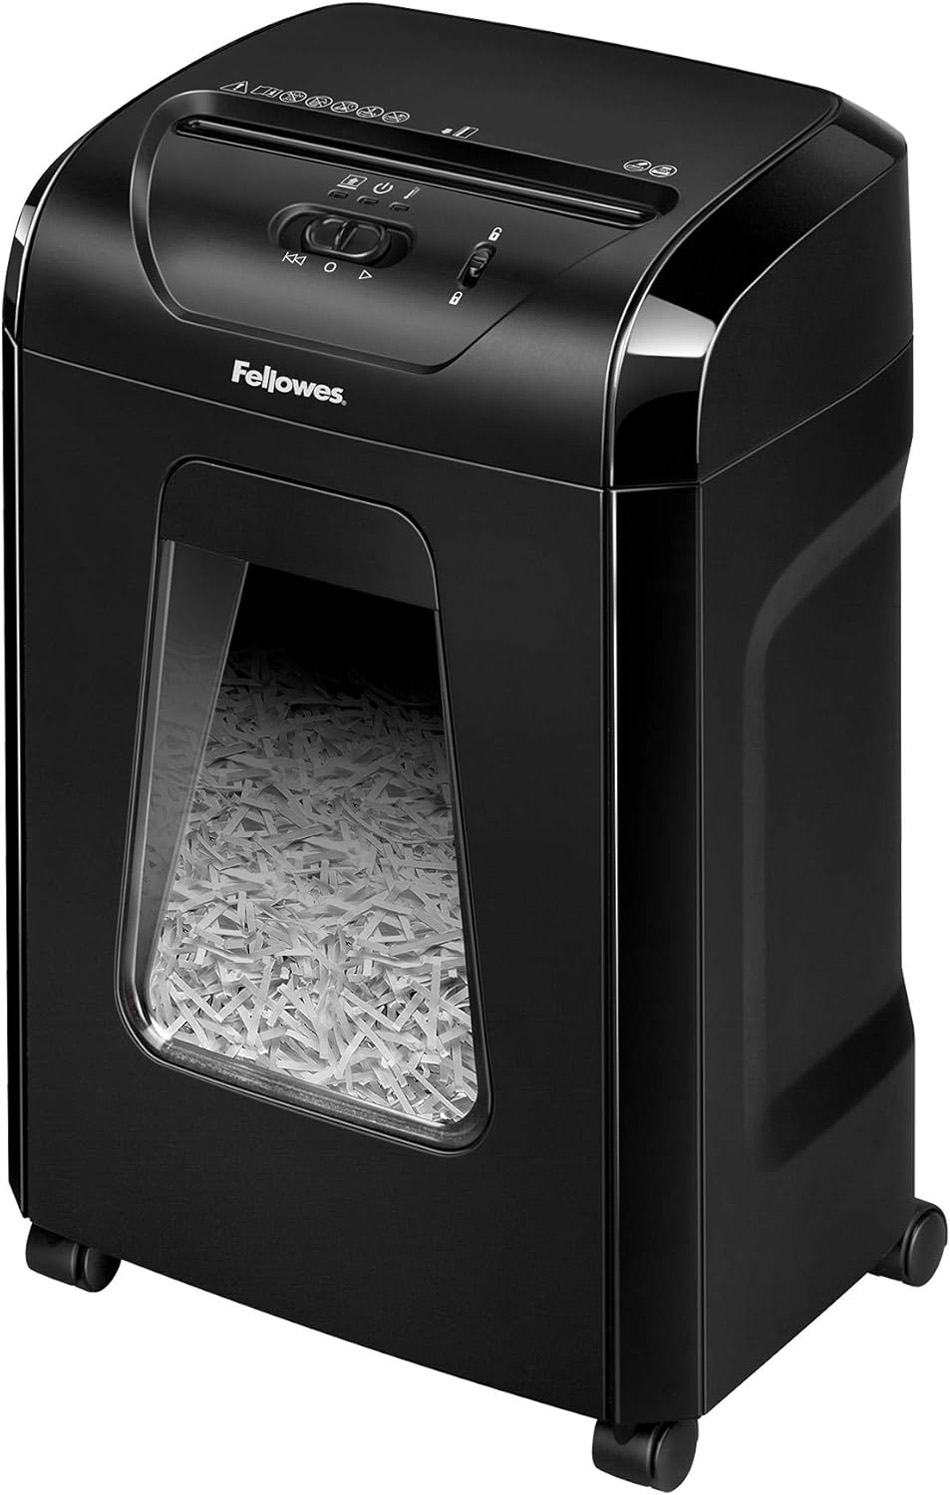 Fellowes Powershred 12C15 12-Sheet Crosscut Paper Shredder for Office and Home with Safety Lock